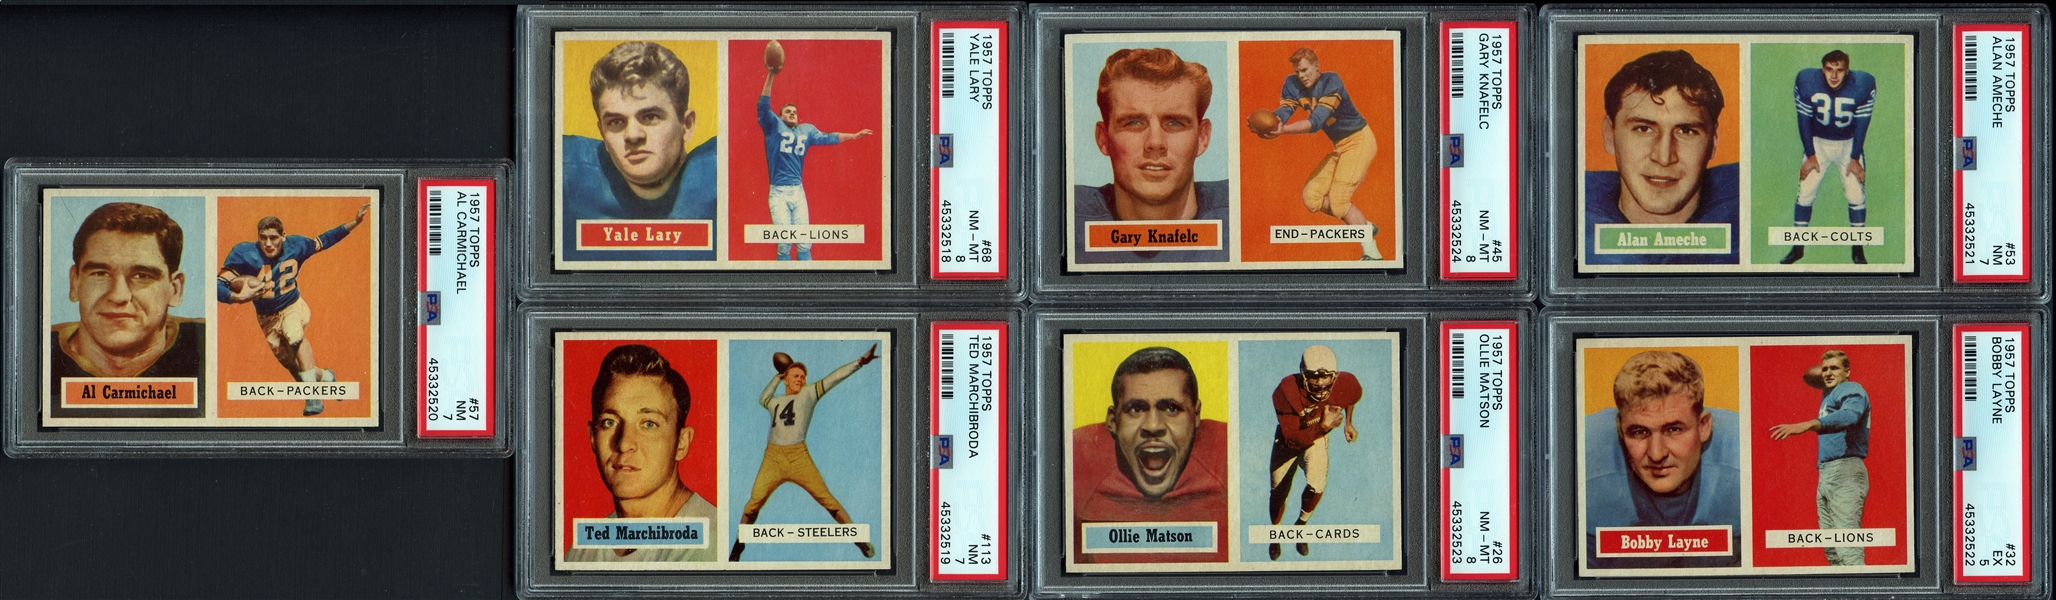 1957 Topps Football Seven (7) Card PSA Graded Group with Hall of Famers